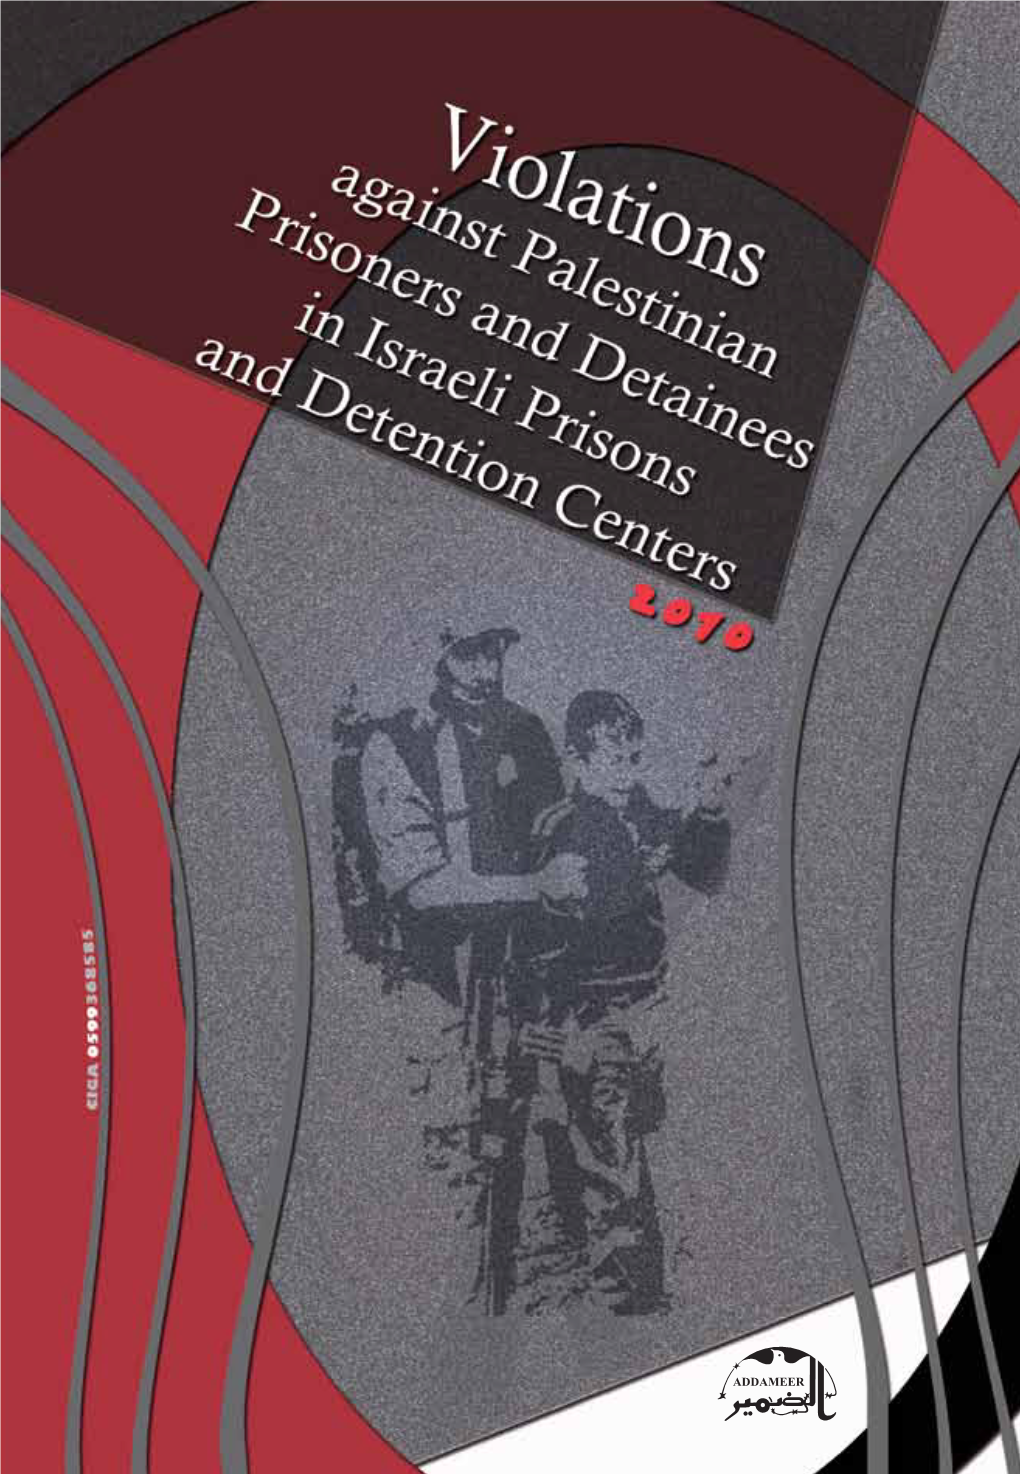 Violations Against Palestinian Prisoners and Detainees in Israeli Prisons and Detention Centers Annual Report 2010 43 Years of Confrontation